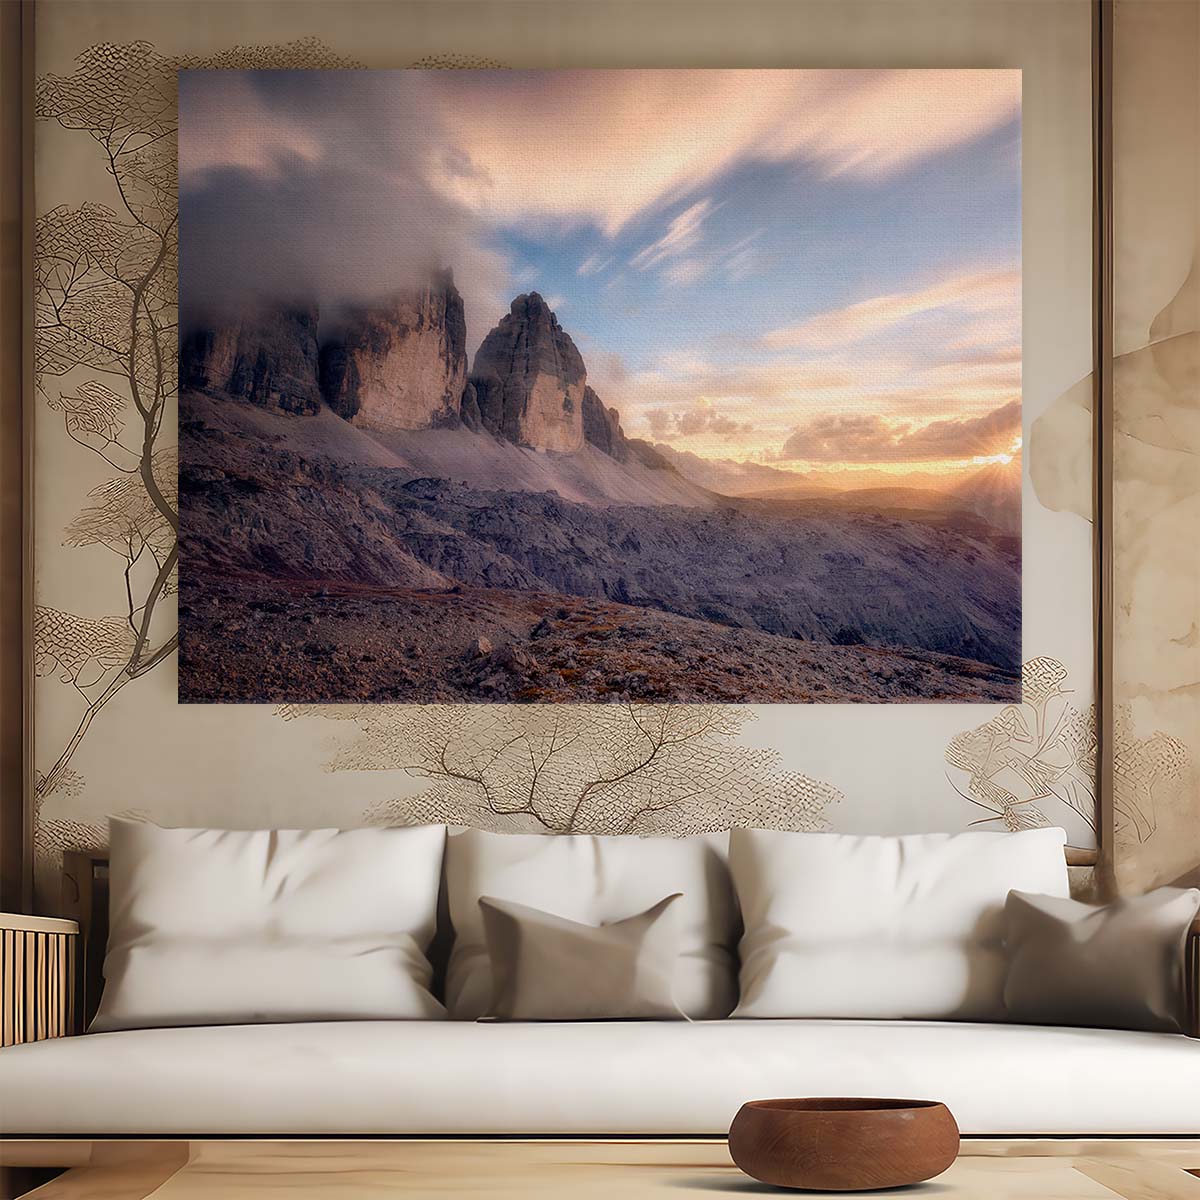 Sunset Over Lavaredo Peaks Mountain Landscape Wall Art by Luxuriance Designs. Made in USA.